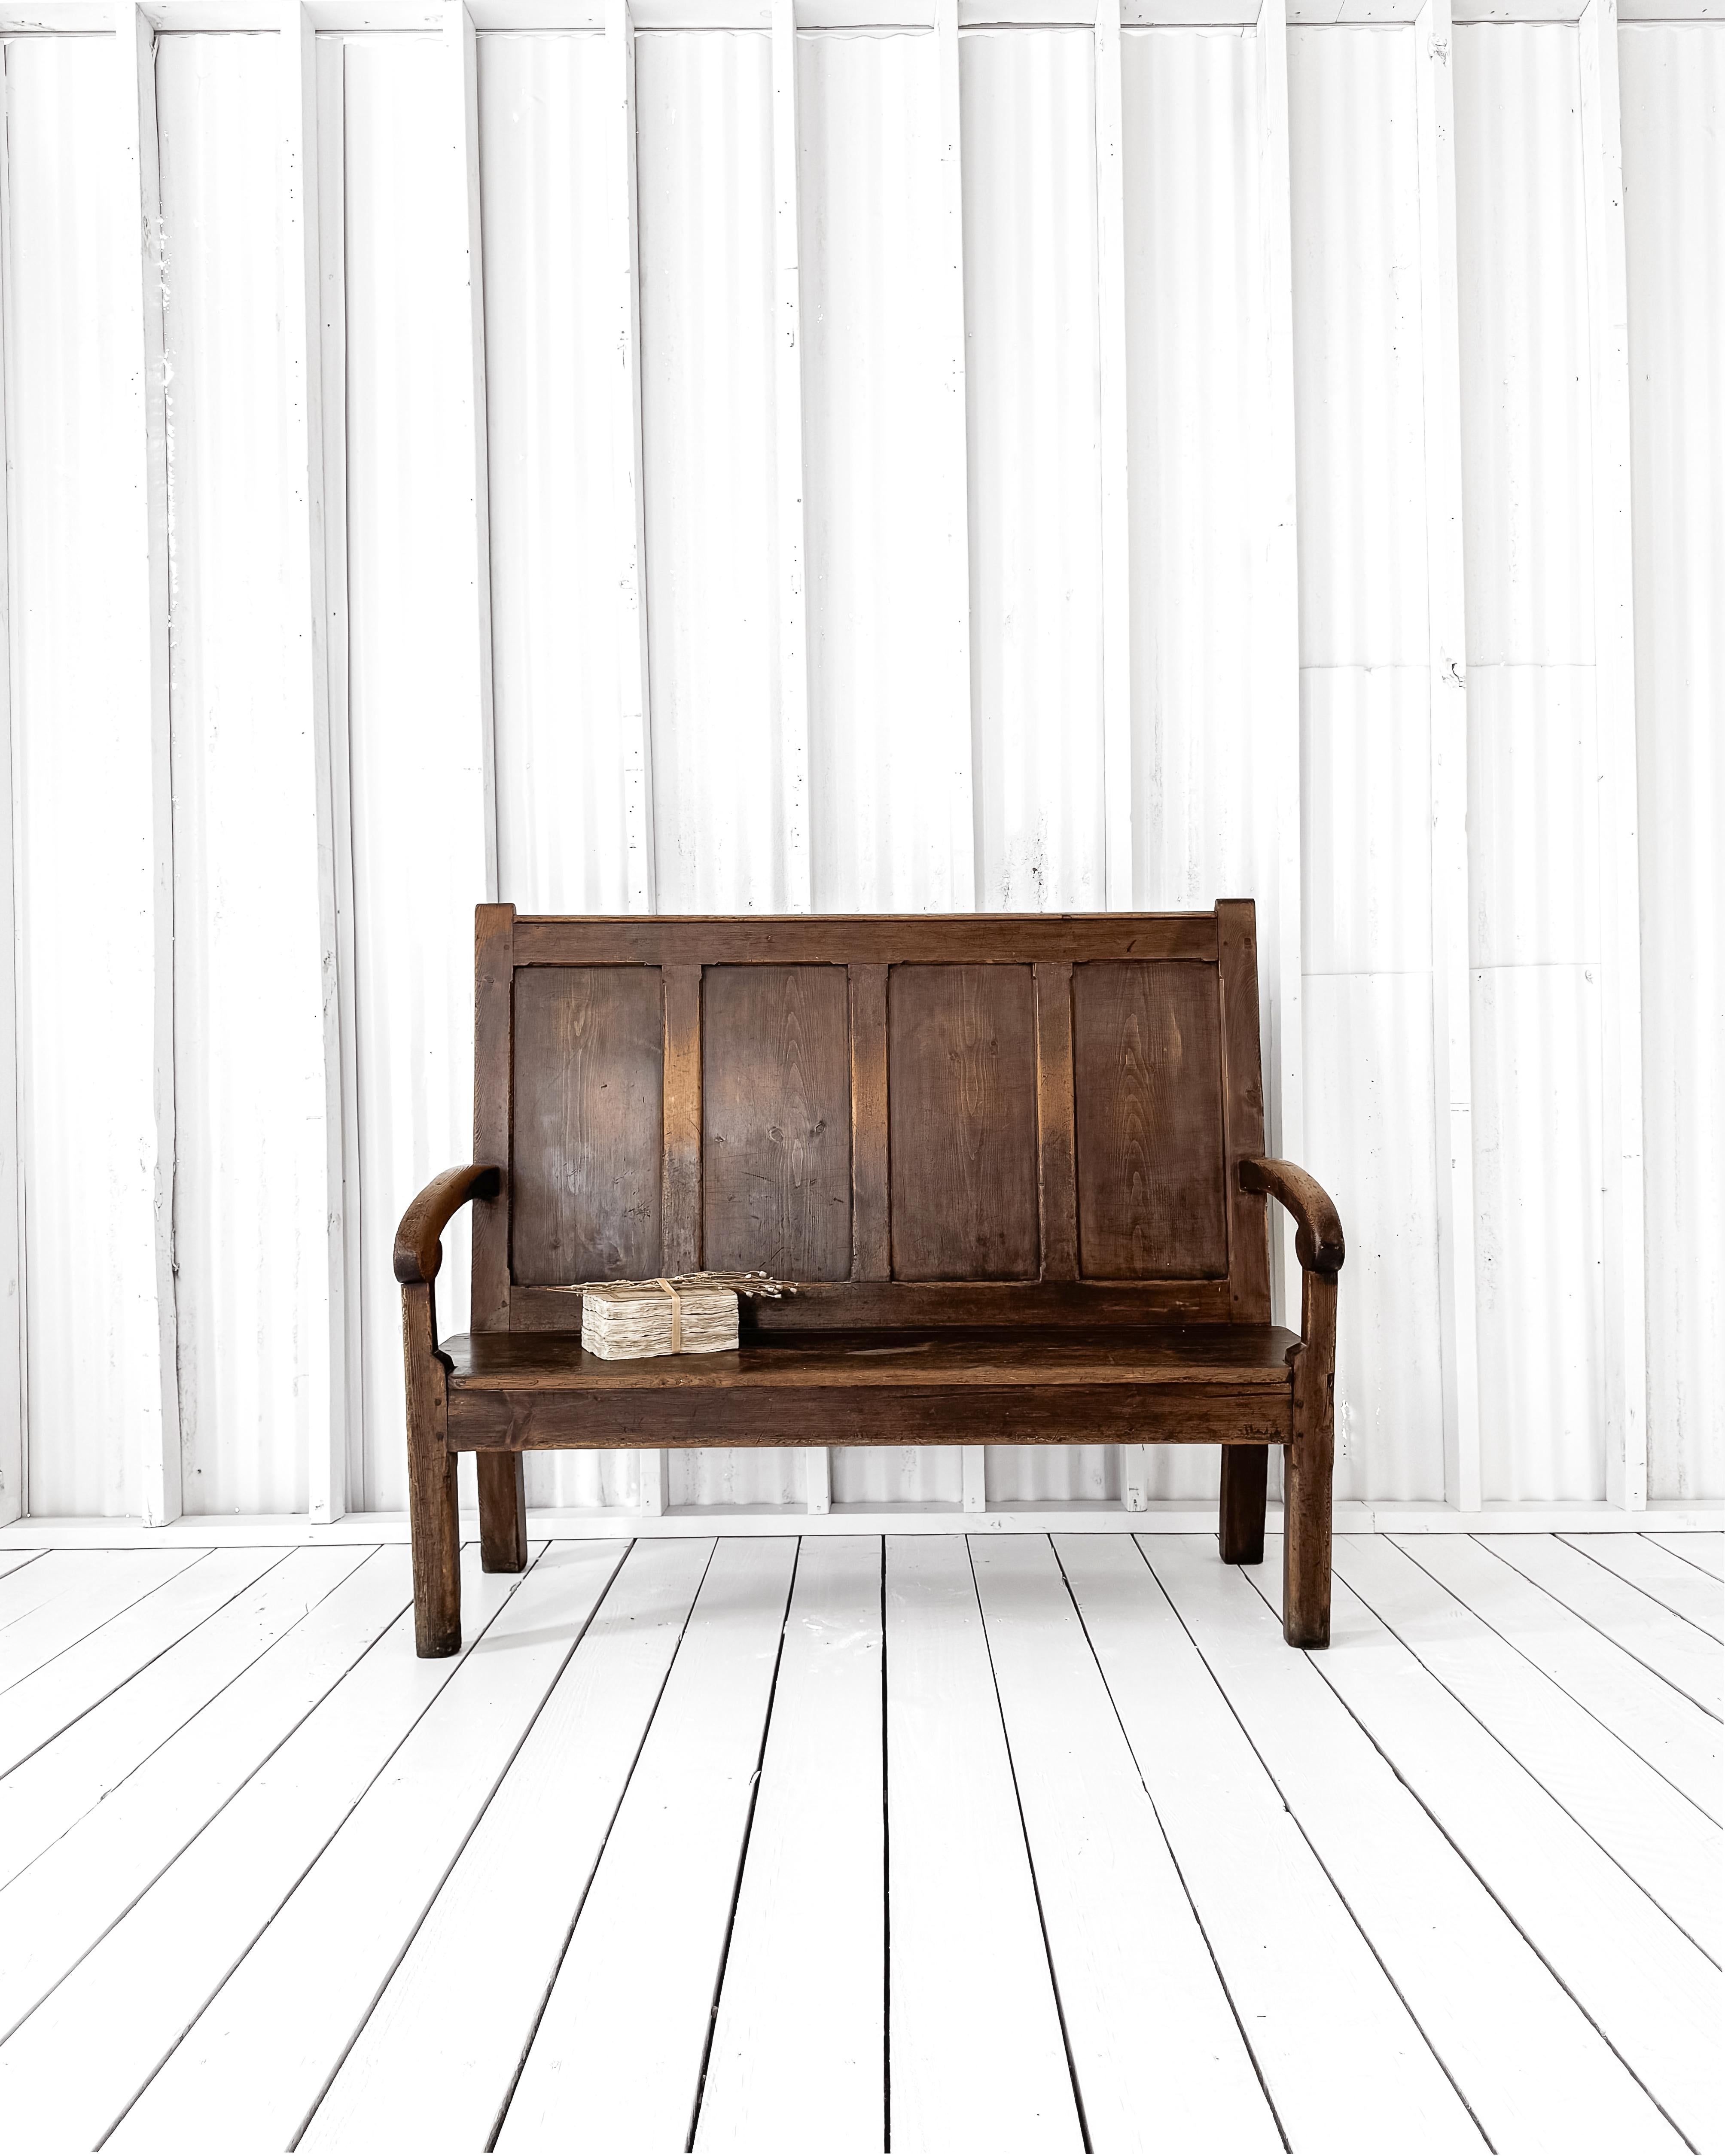 A handsome 19th-century English pine settle with a beautiful patinated finish. The masculine lines of the high fielded panel back are softened by the gracefulness of the slightly curved arms. Pegged construction, a wonderful dark stain, and simple